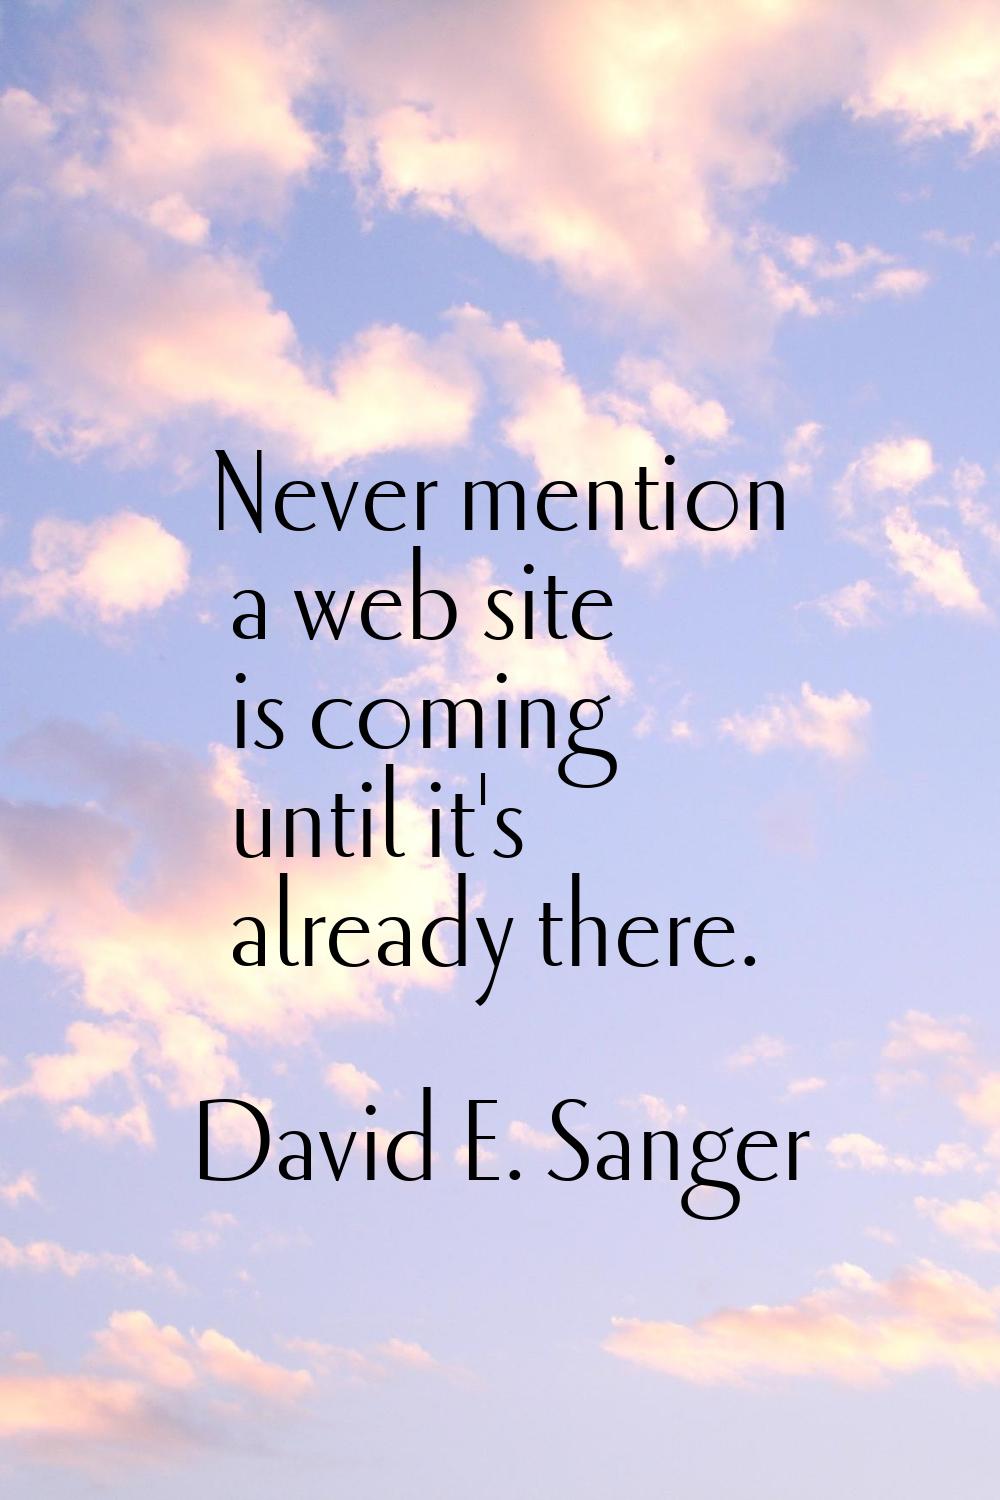 Never mention a web site is coming until it's already there.